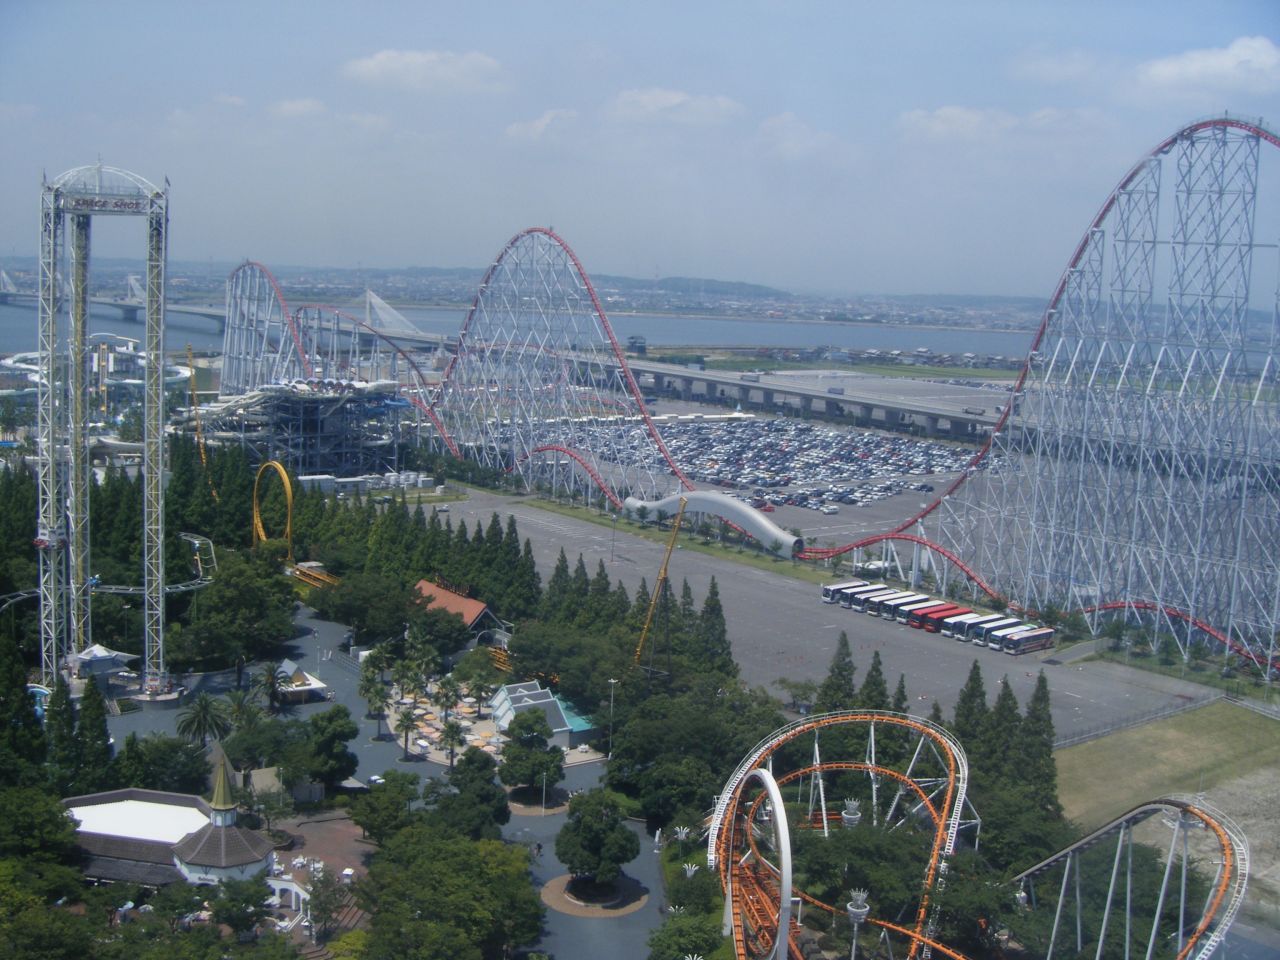 <strong>19. Nagashima Spa Land, Japan:</strong> The Steel Dragon roller coaster is built for speed at Nagashima Spa Land in Kuwana, Japan. 